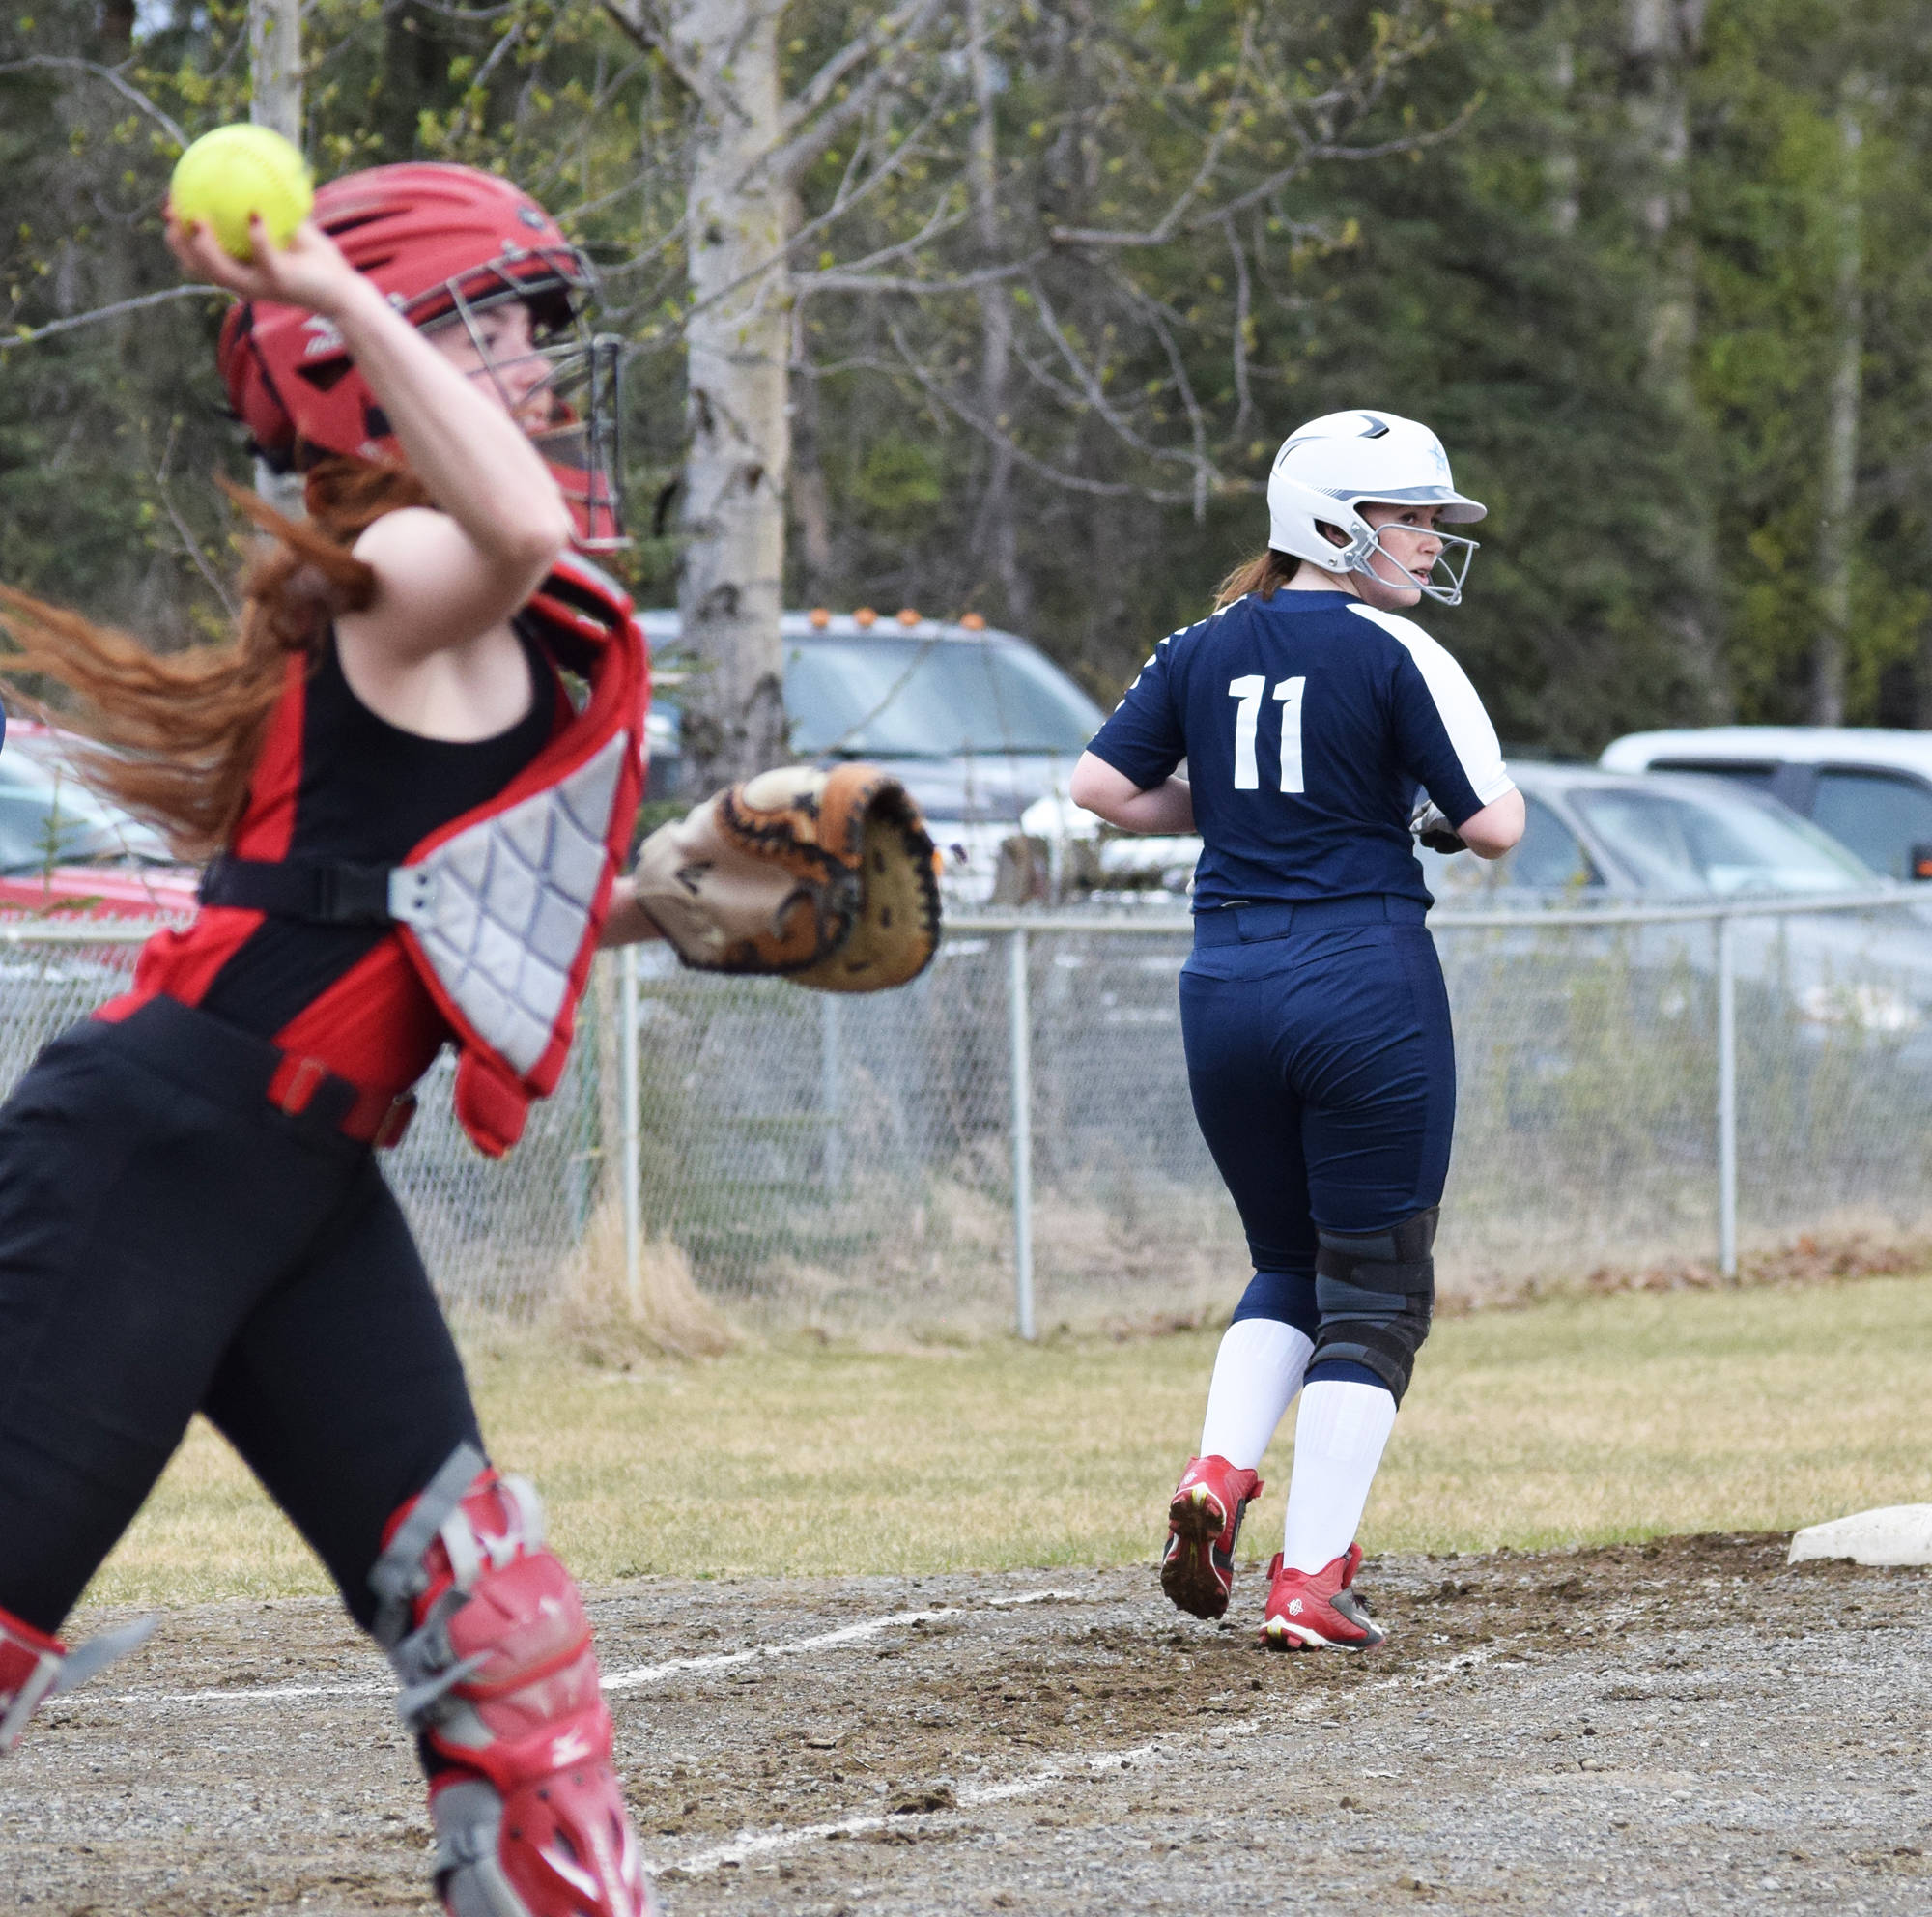 Soldotna’s Tara Lynn Frates (11) takes a look behind as Kenai Central catcher Alyssa Stanton makes a throw to first base Wednesday at the Soldotna Little League Fields. (Photo by Joey Klecka/Peninsula Clarion)